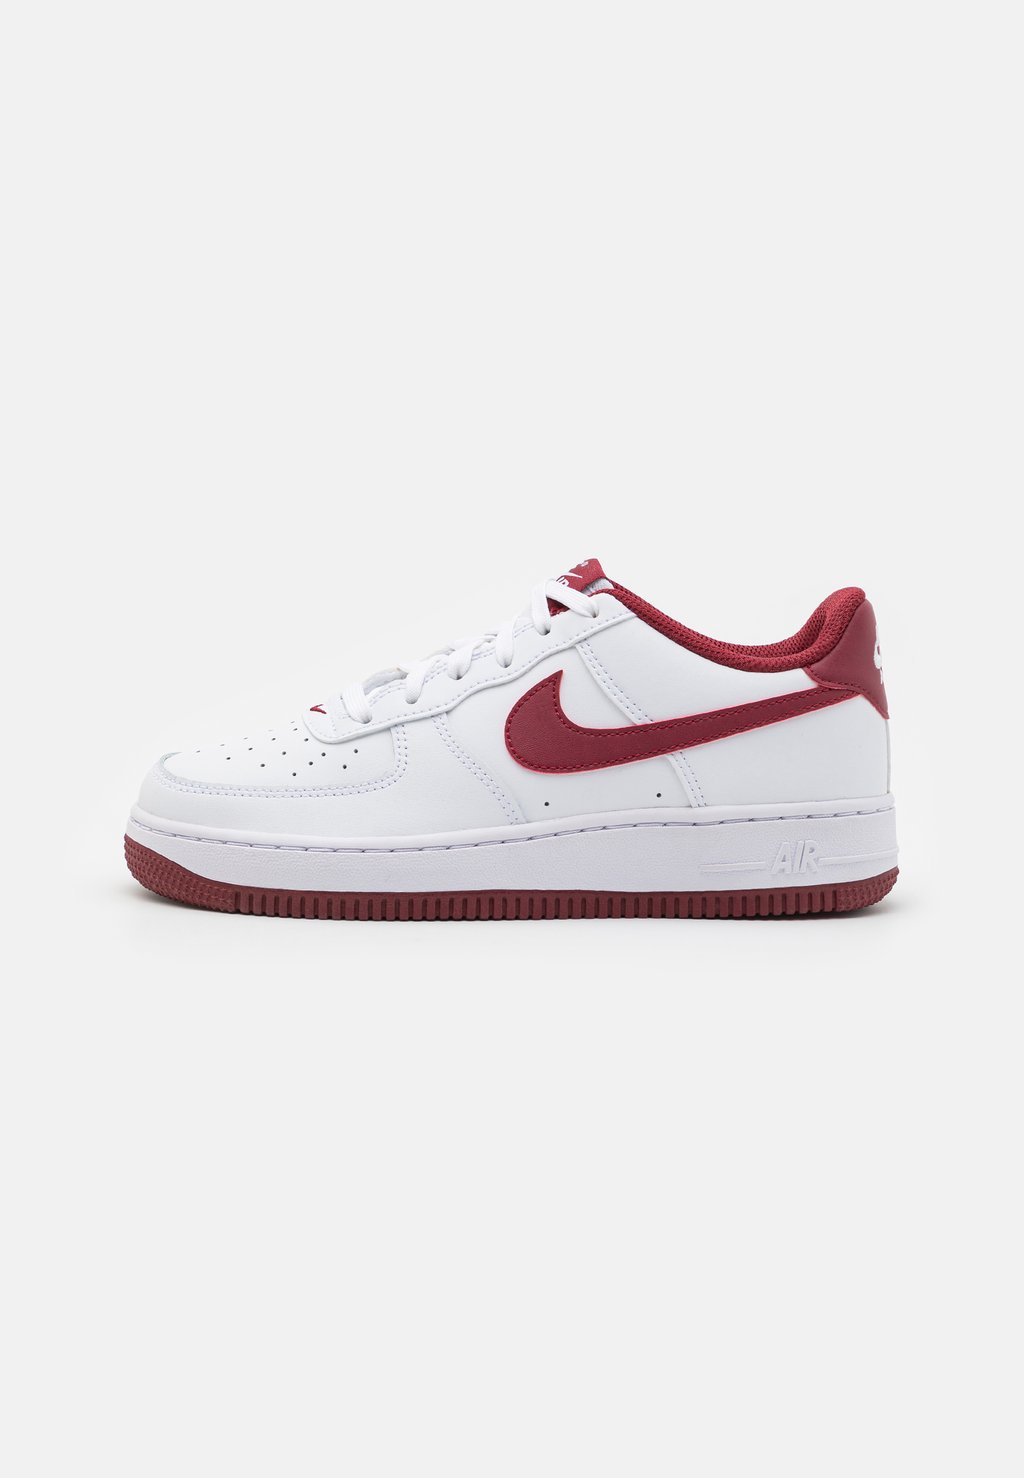 Кроссовки низкие AIR FORCE 1 UNISEX Nike Sportswear, цвет white/picante red/team red